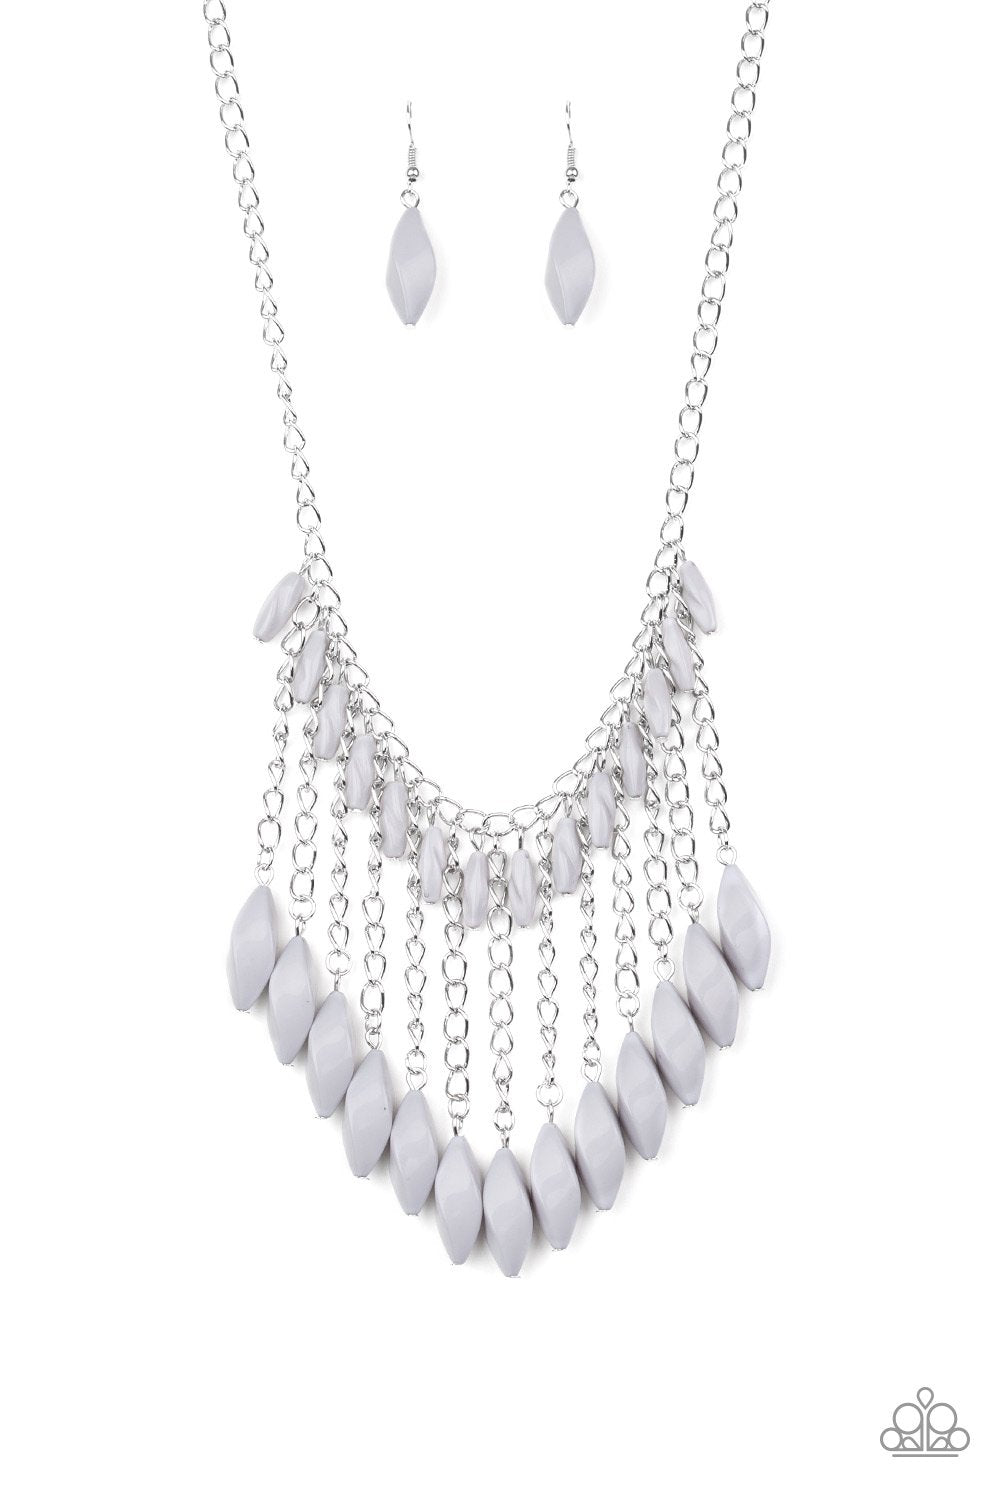 Venturous Vibes Silver Necklace - Paparazzi Accessories - lightbox -CarasShop.com - $5 Jewelry by Cara Jewels